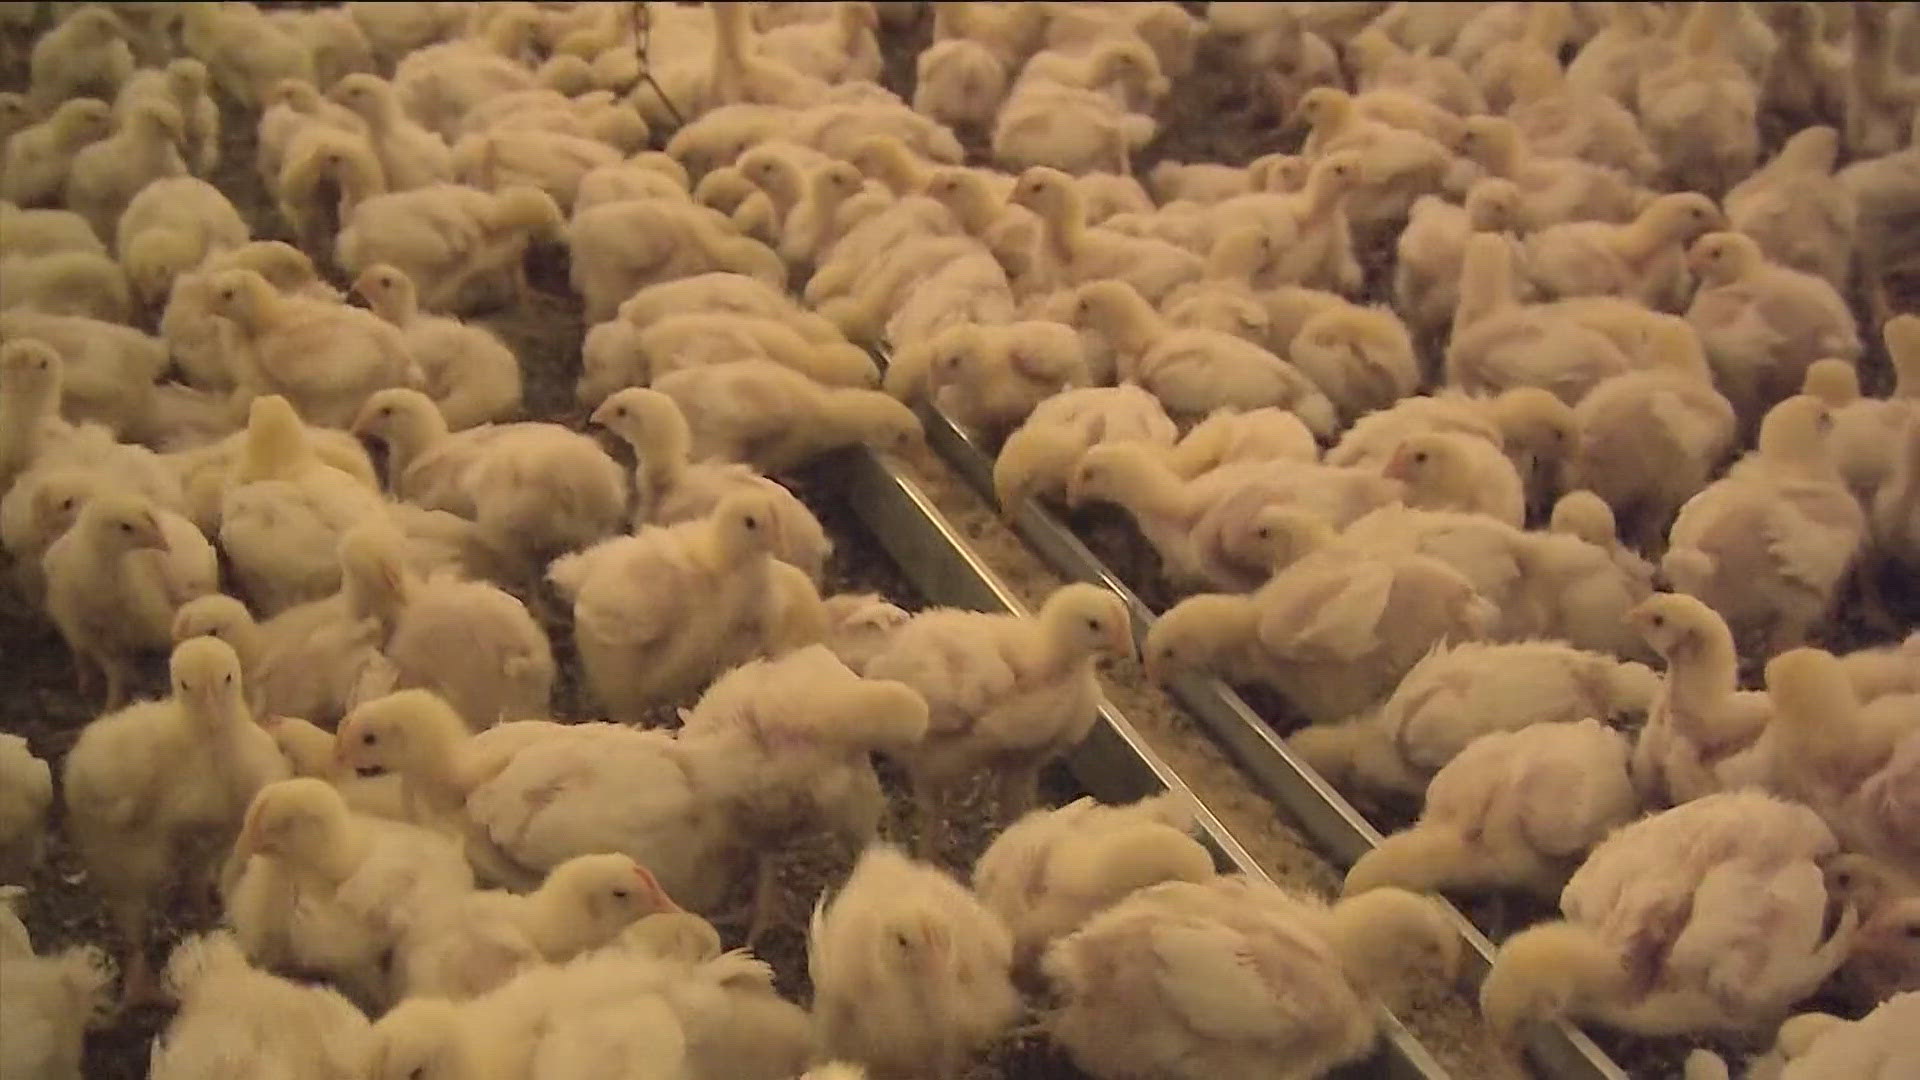 One of the nation's largest fresh egg producers has stopped production after discovering a bird flu outbreak in its Texas facility.